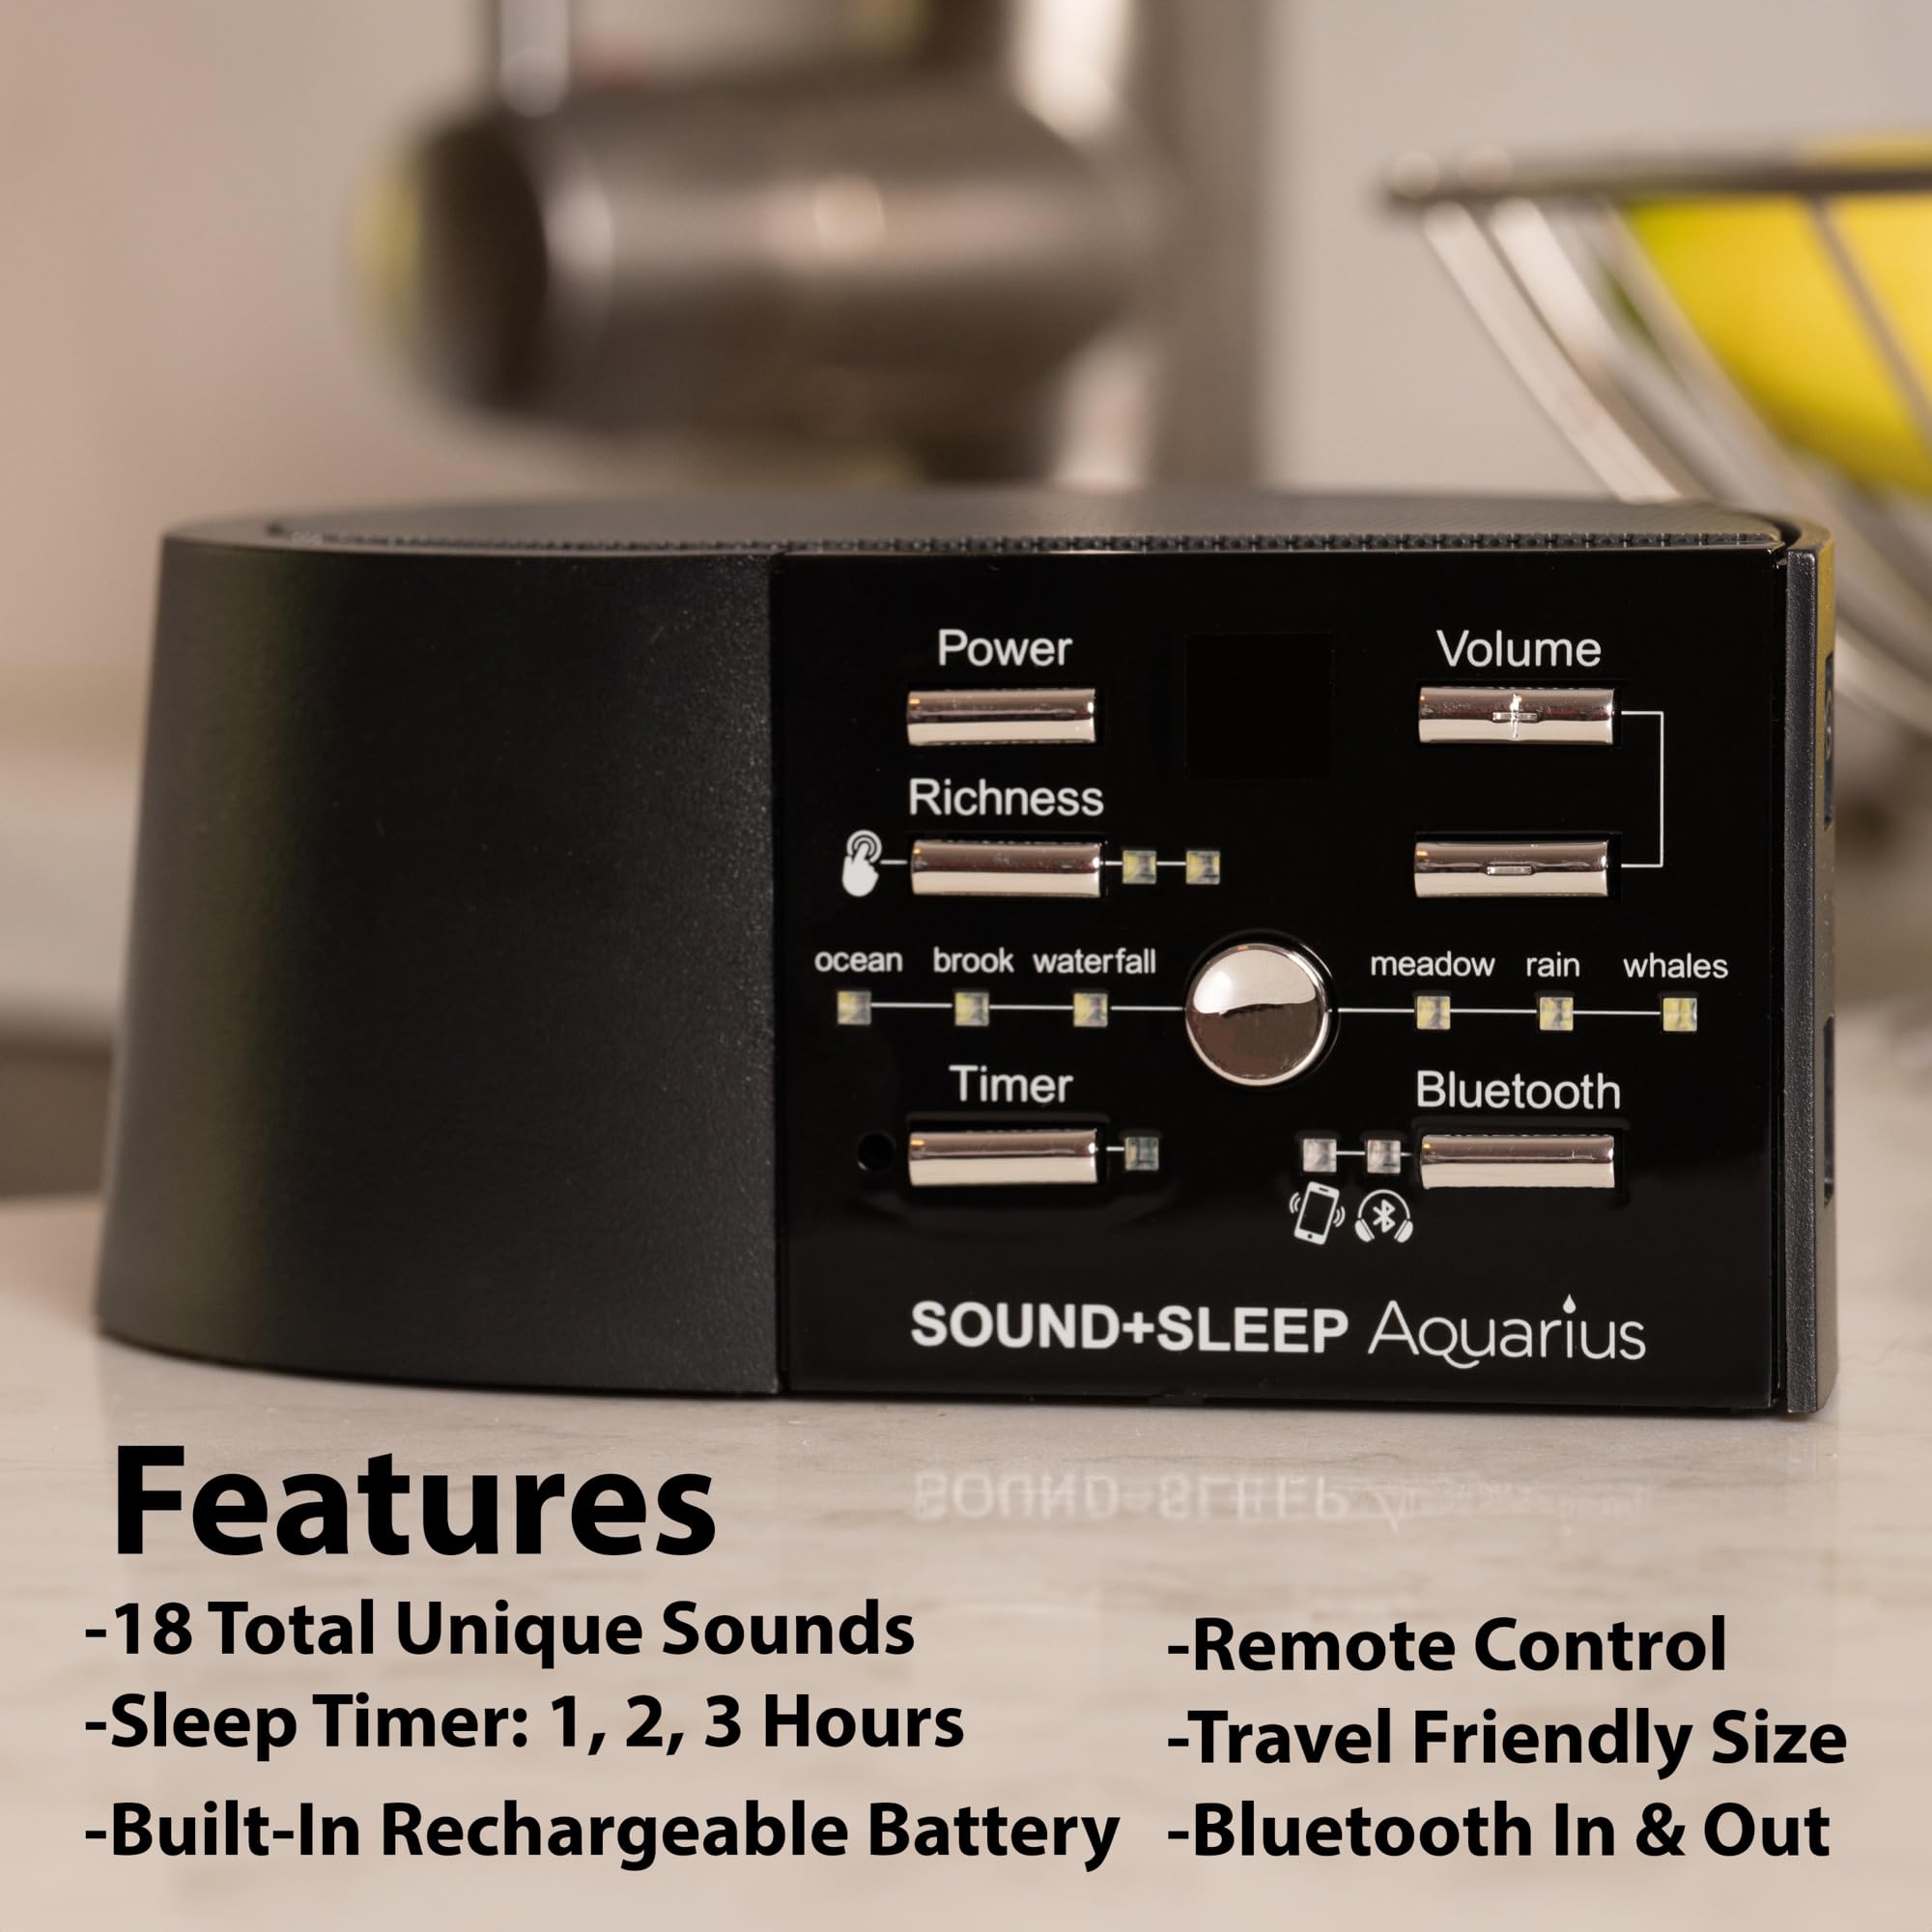 Sound+Sleep Aquarius Aquatic Non-Looping Portable Sound Sleep Machine and Bluetooth Speaker with 18 Soothing Water Sounds and Sleep Timer, Travel Friendly for Home, Office, Nursery